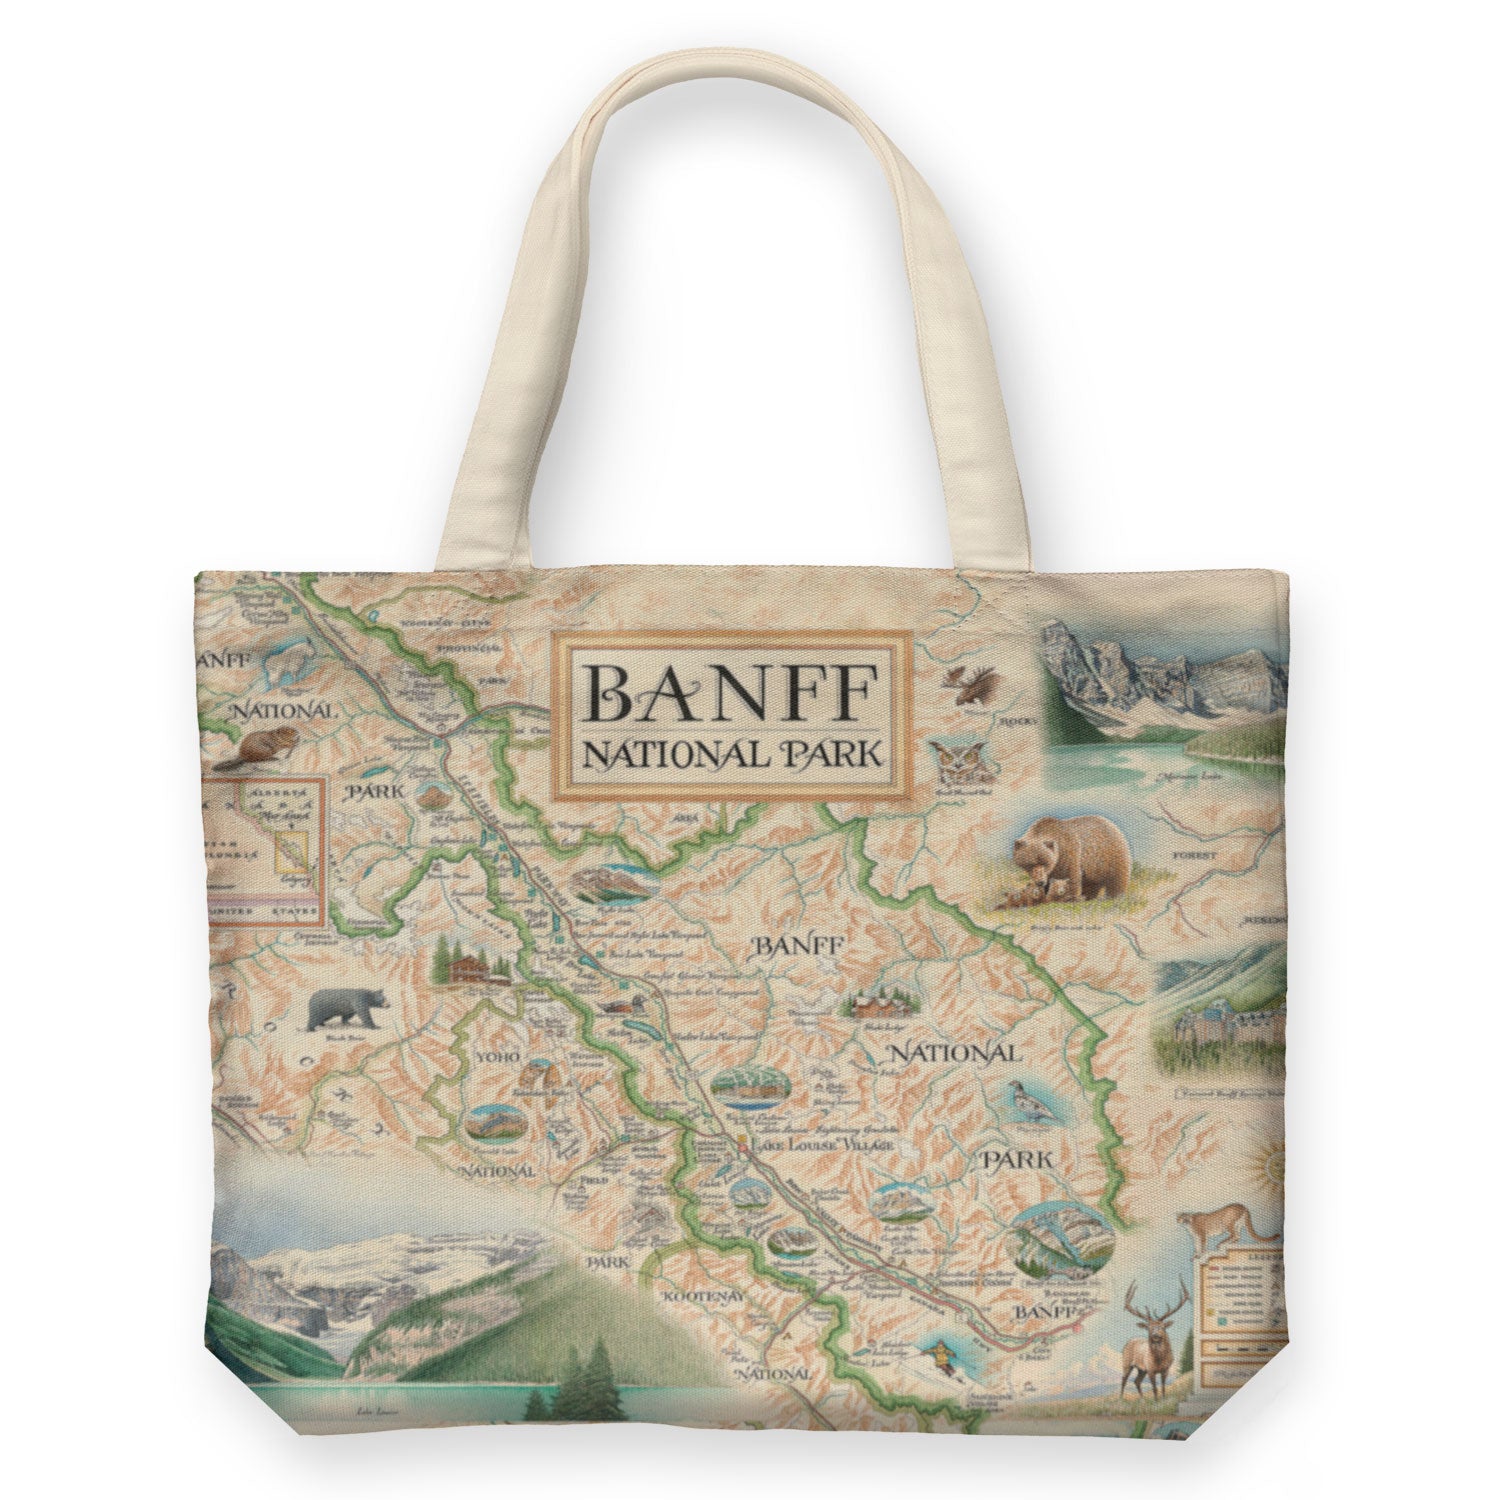 Canada's Banff National Park Hand-Drawn Map in earth-tone colors. Featuring British Columbia, Yoho, Lake Louise, Calgary, pine forests, glaciers, snow-capped mountains, and alpine lakes. Native plants and flowers like Indian Paintbrushes and wildlife like grizzly bears, moose, and elks.